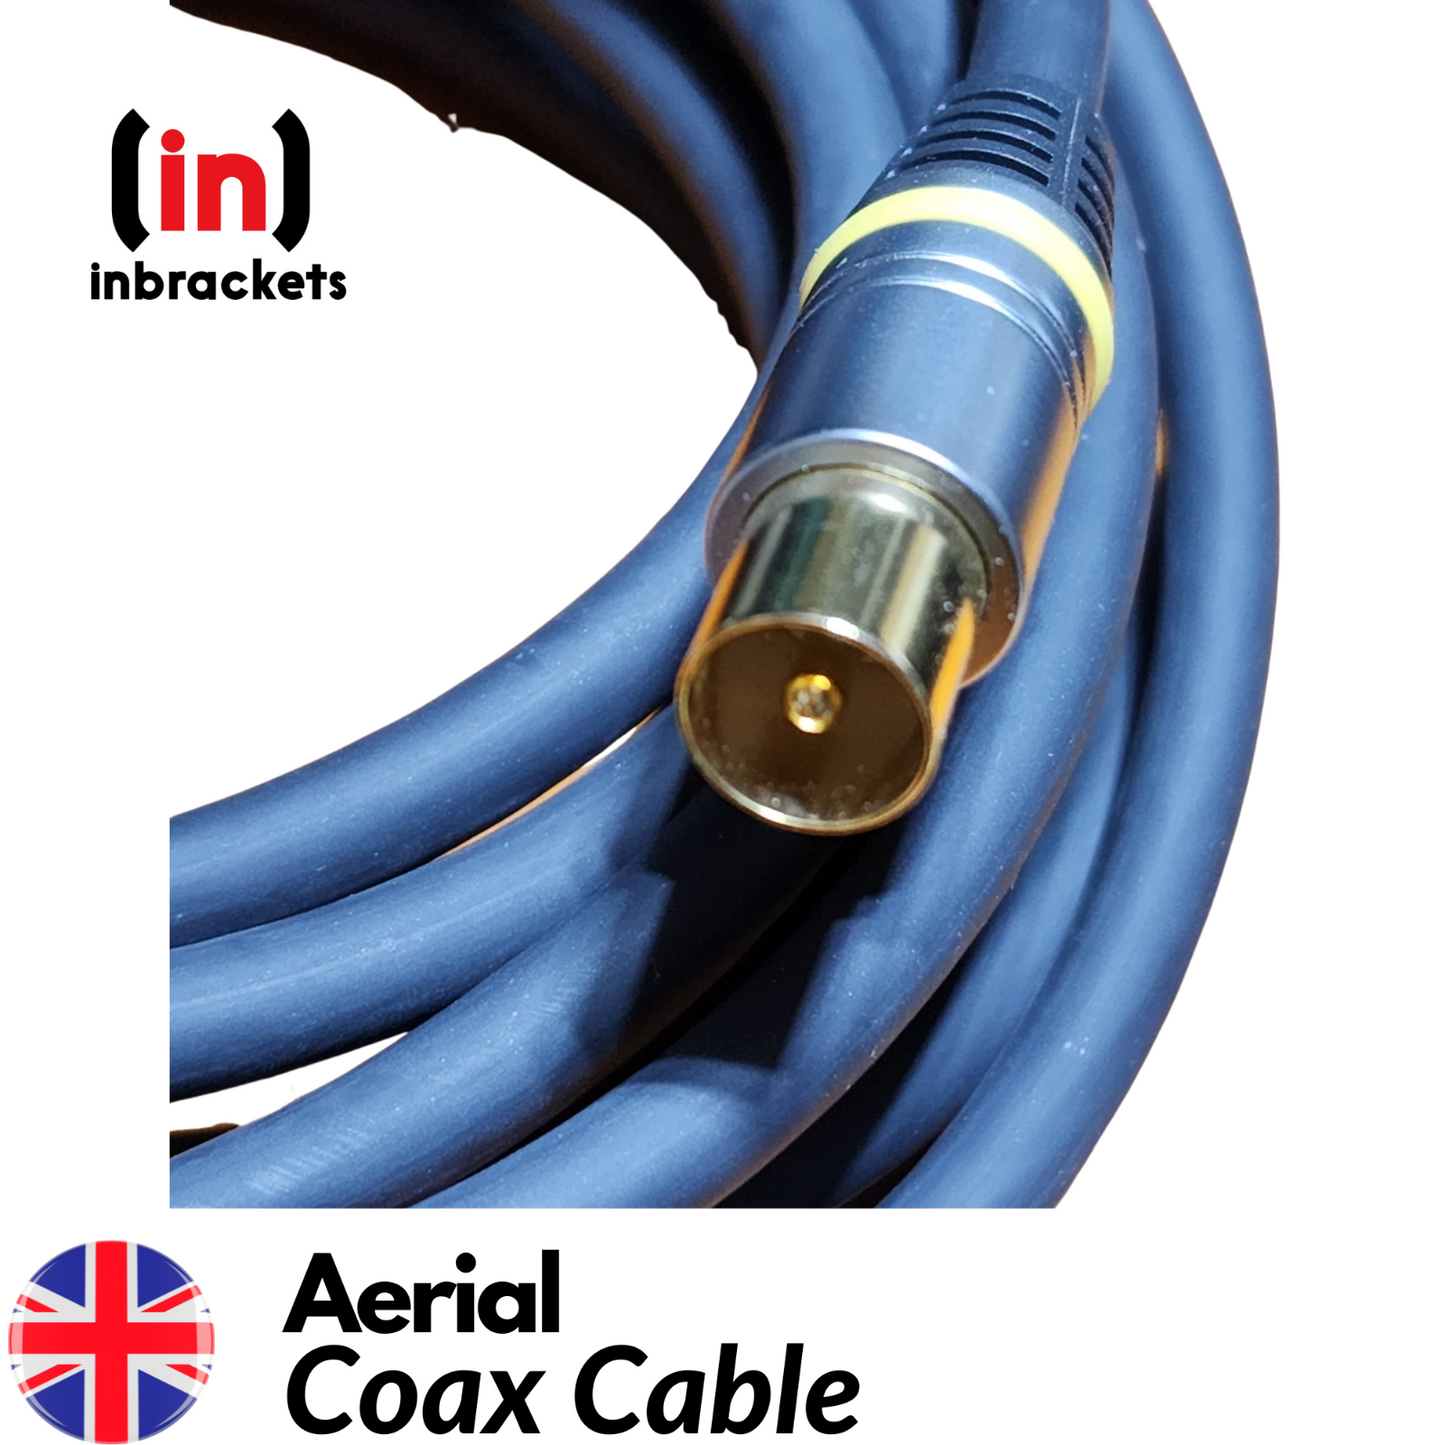 Tv Aerial Coax Cable RF Lead Male Plug to Plug with Coupler Black 4Metres